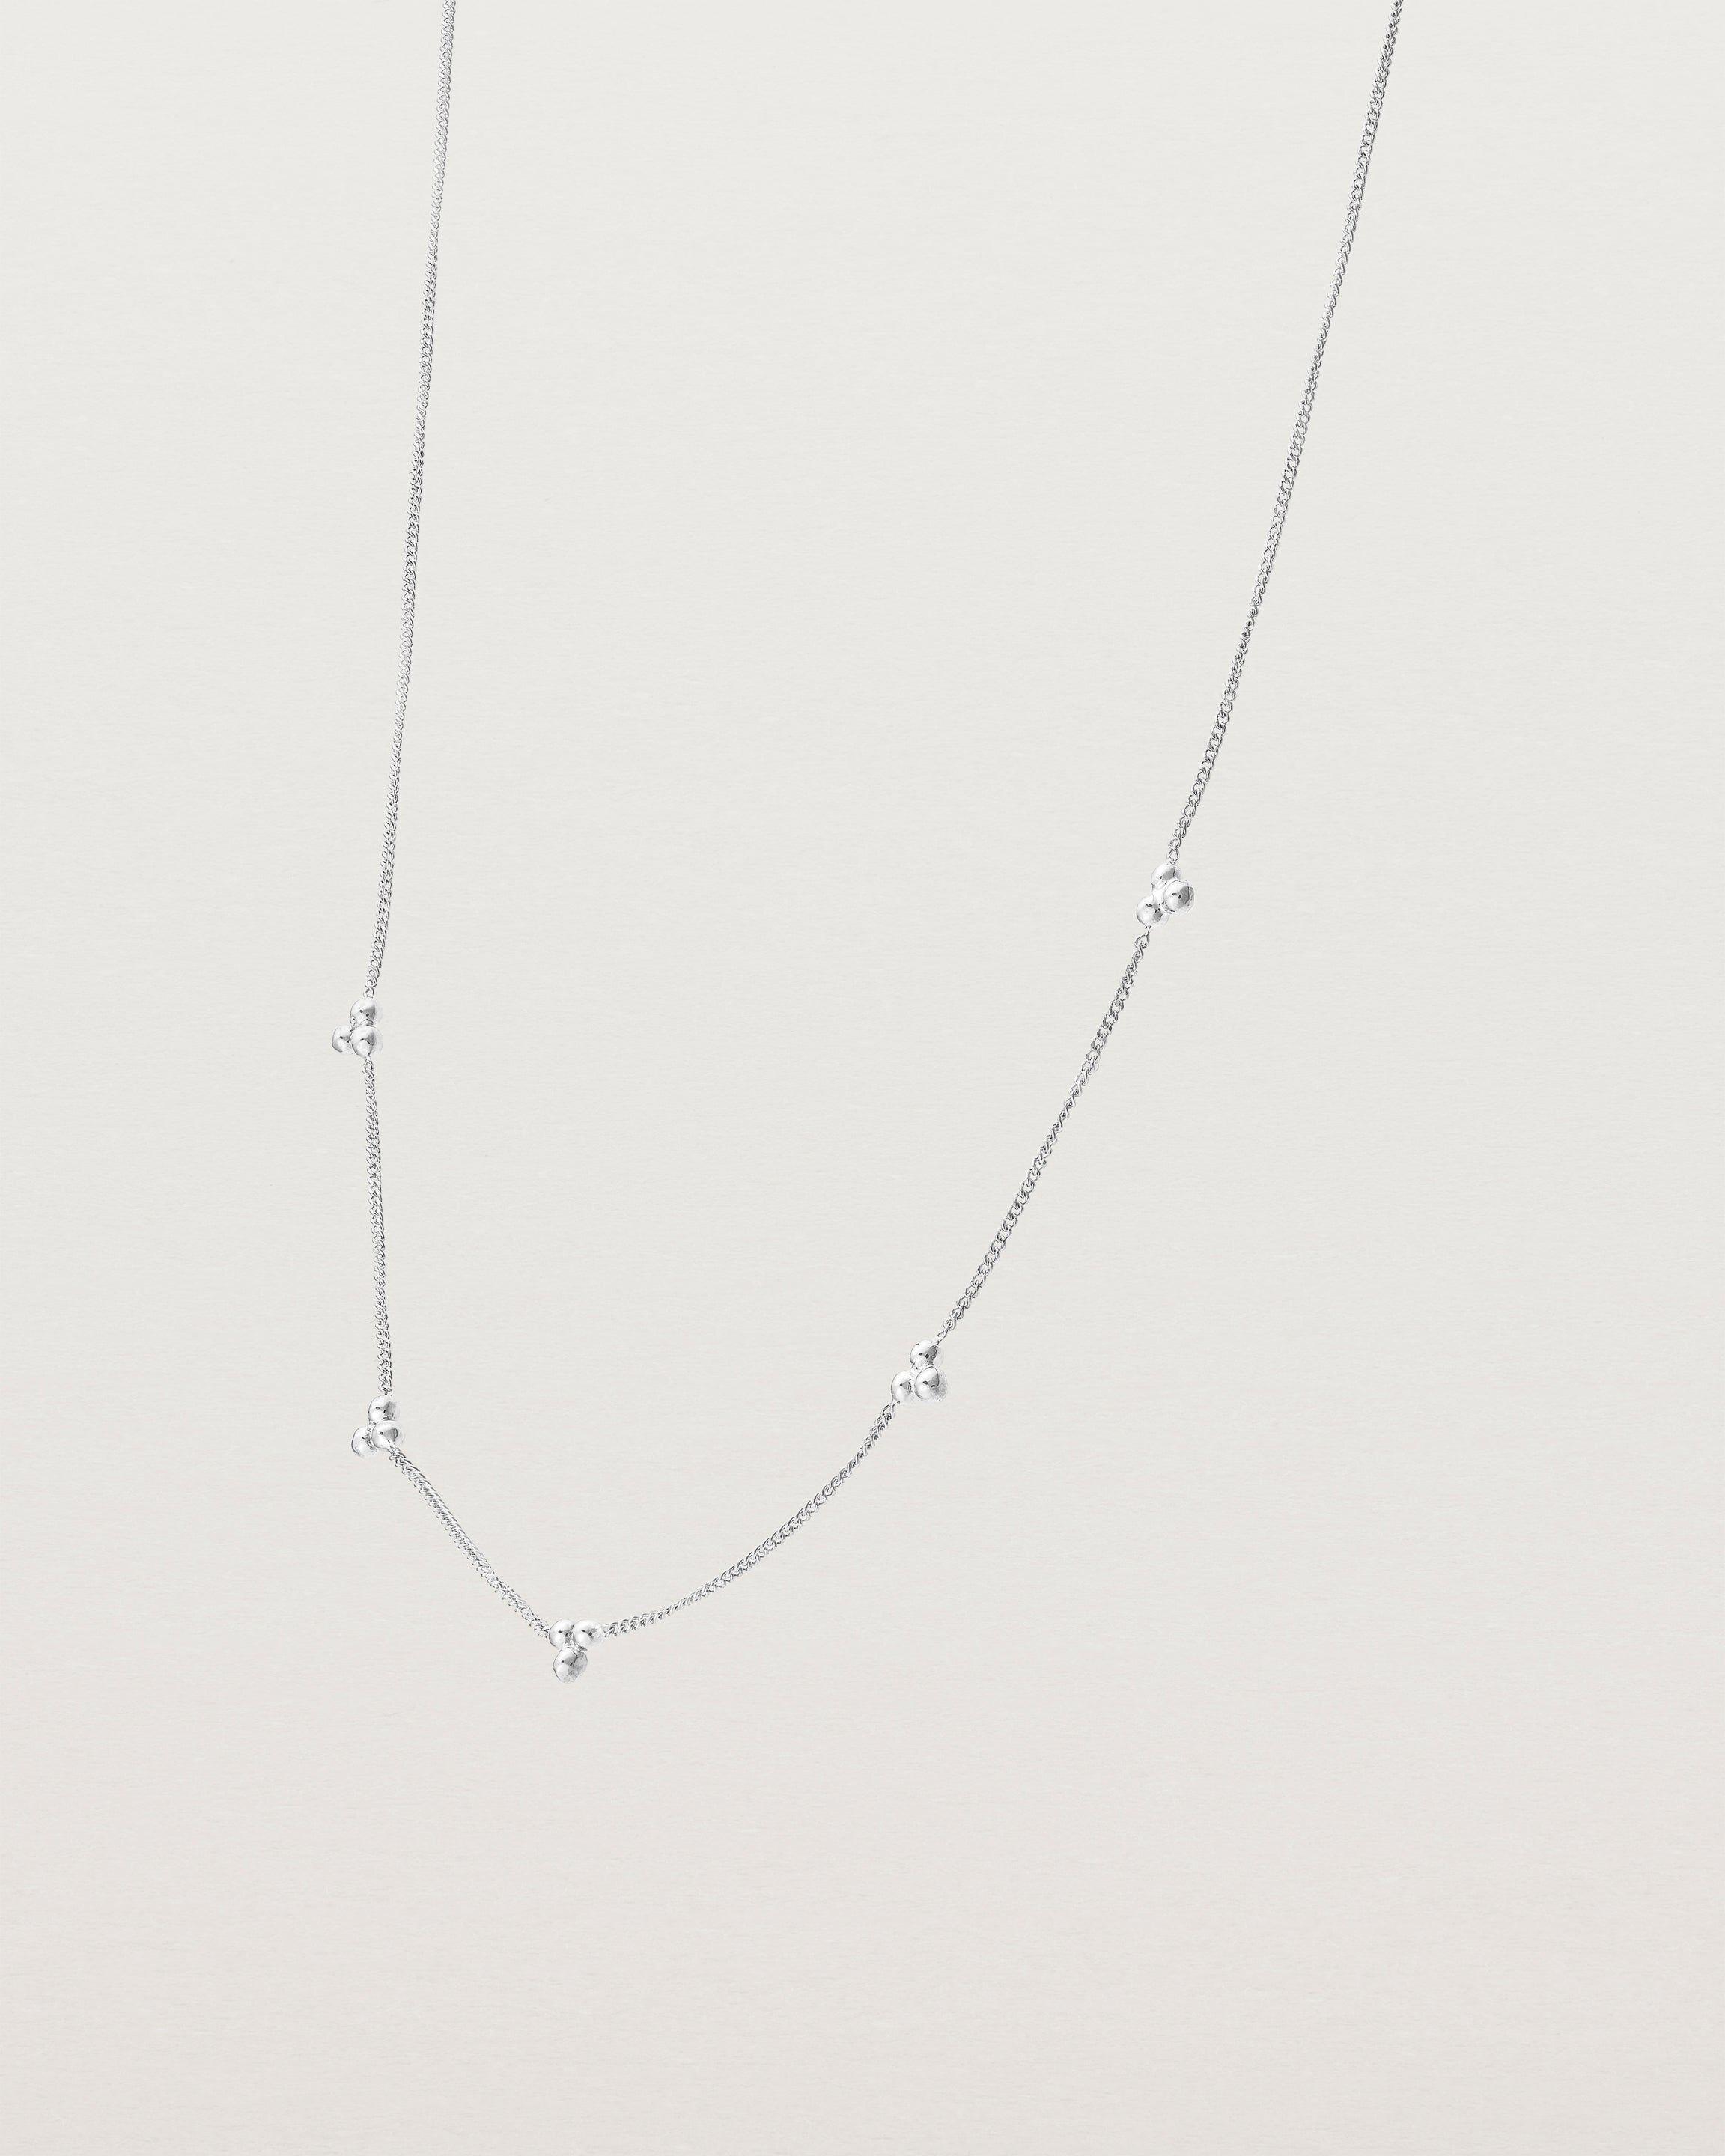 Angled view of the Tellue Necklace in sterling silver.